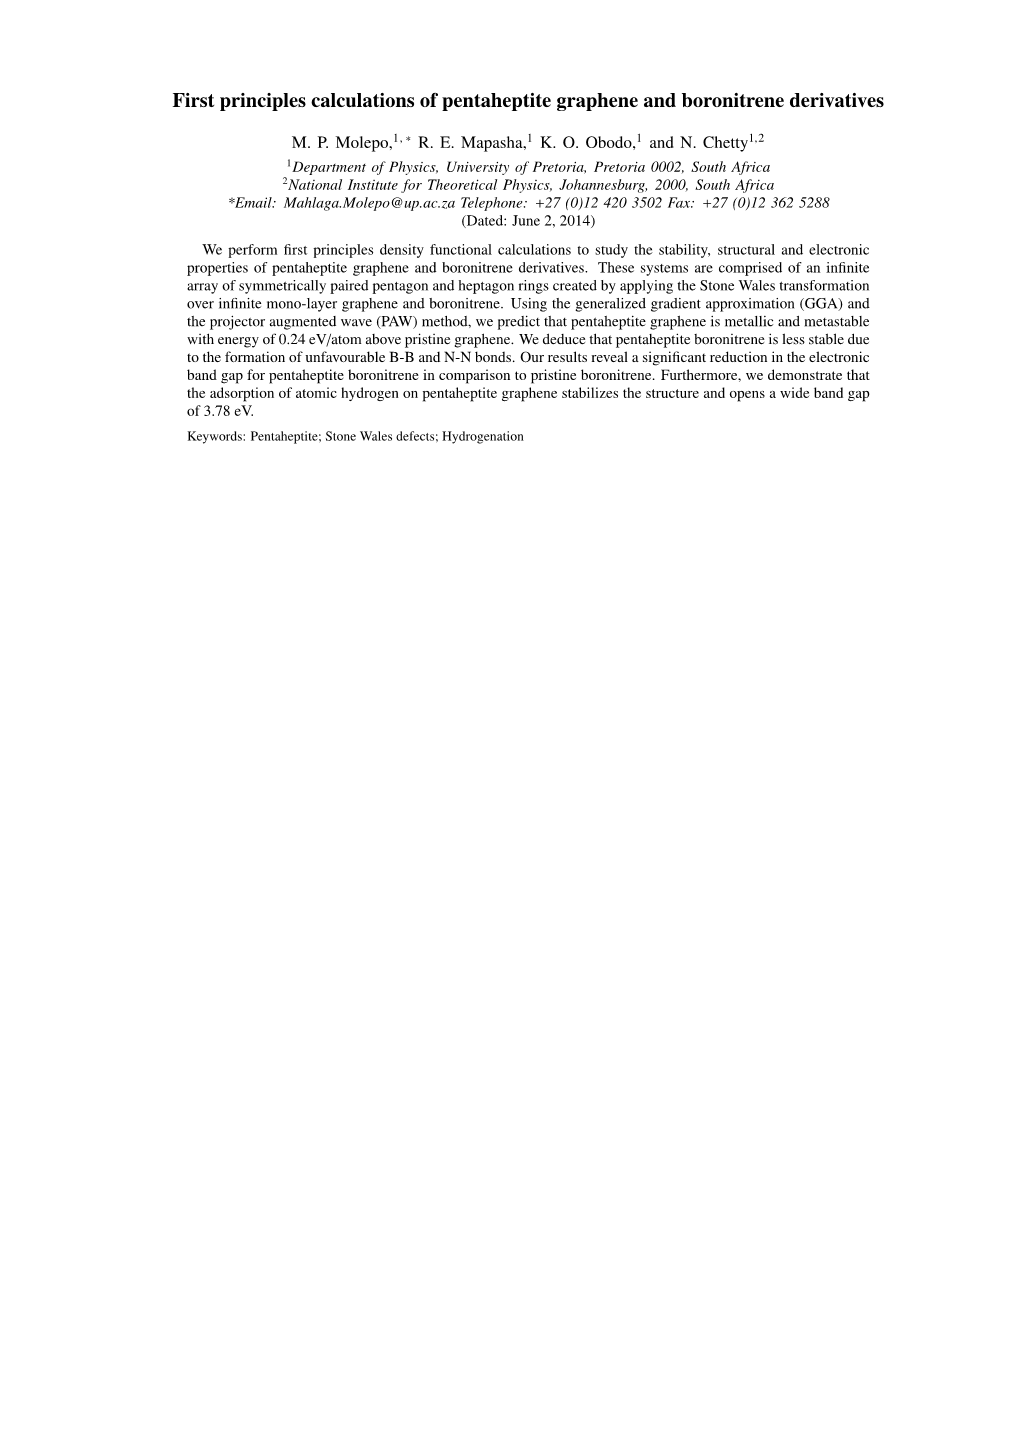 First Principles Calculations of Pentaheptite Graphene and Boronitrene Derivatives